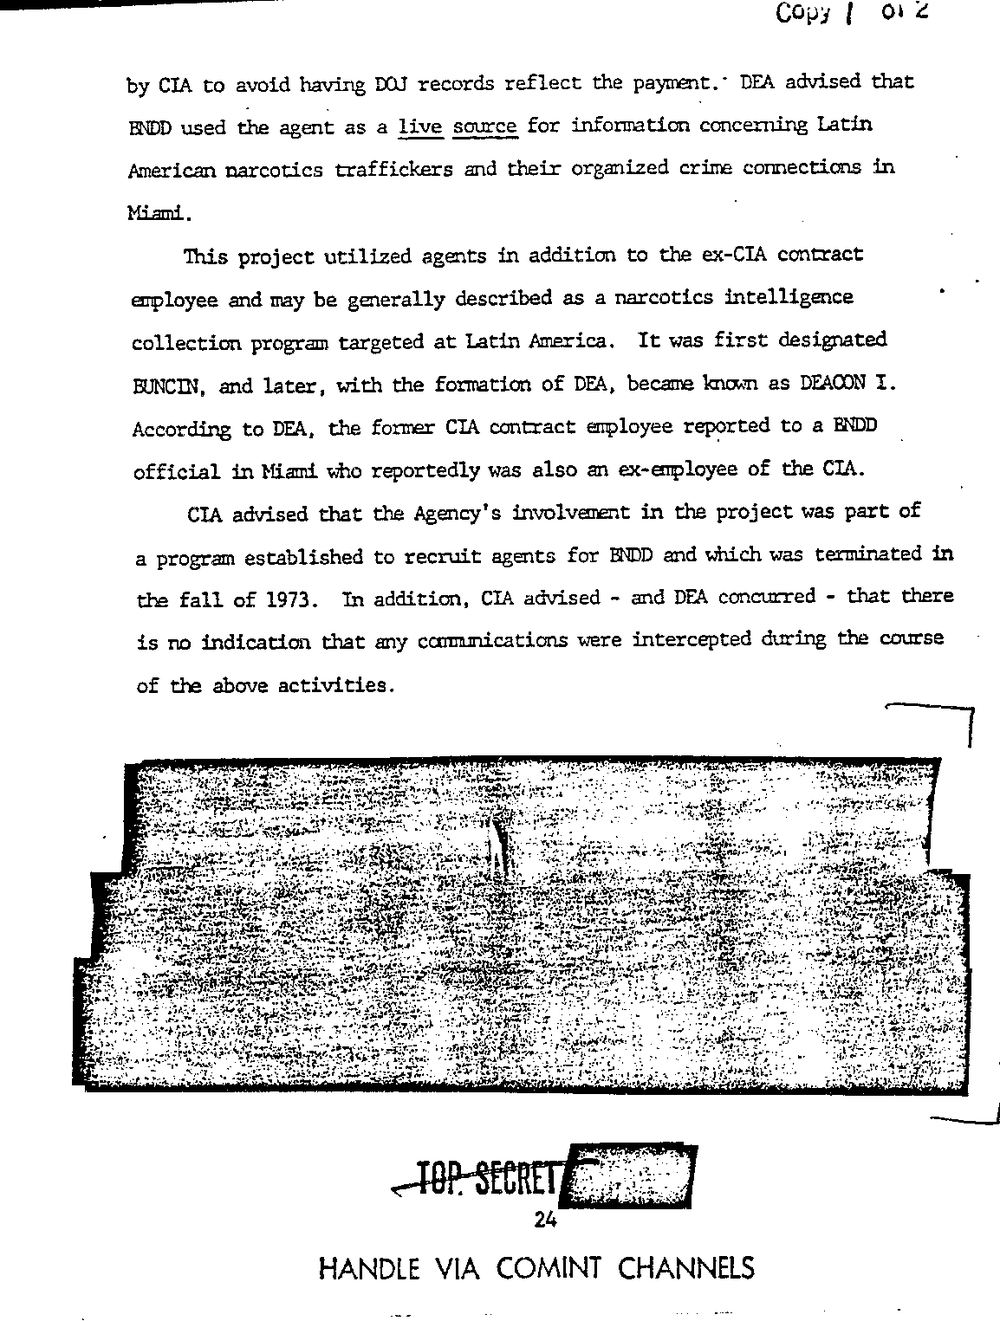 Page 32 from Report on Inquiry Into CIA Related Electronic Surveillance Activities